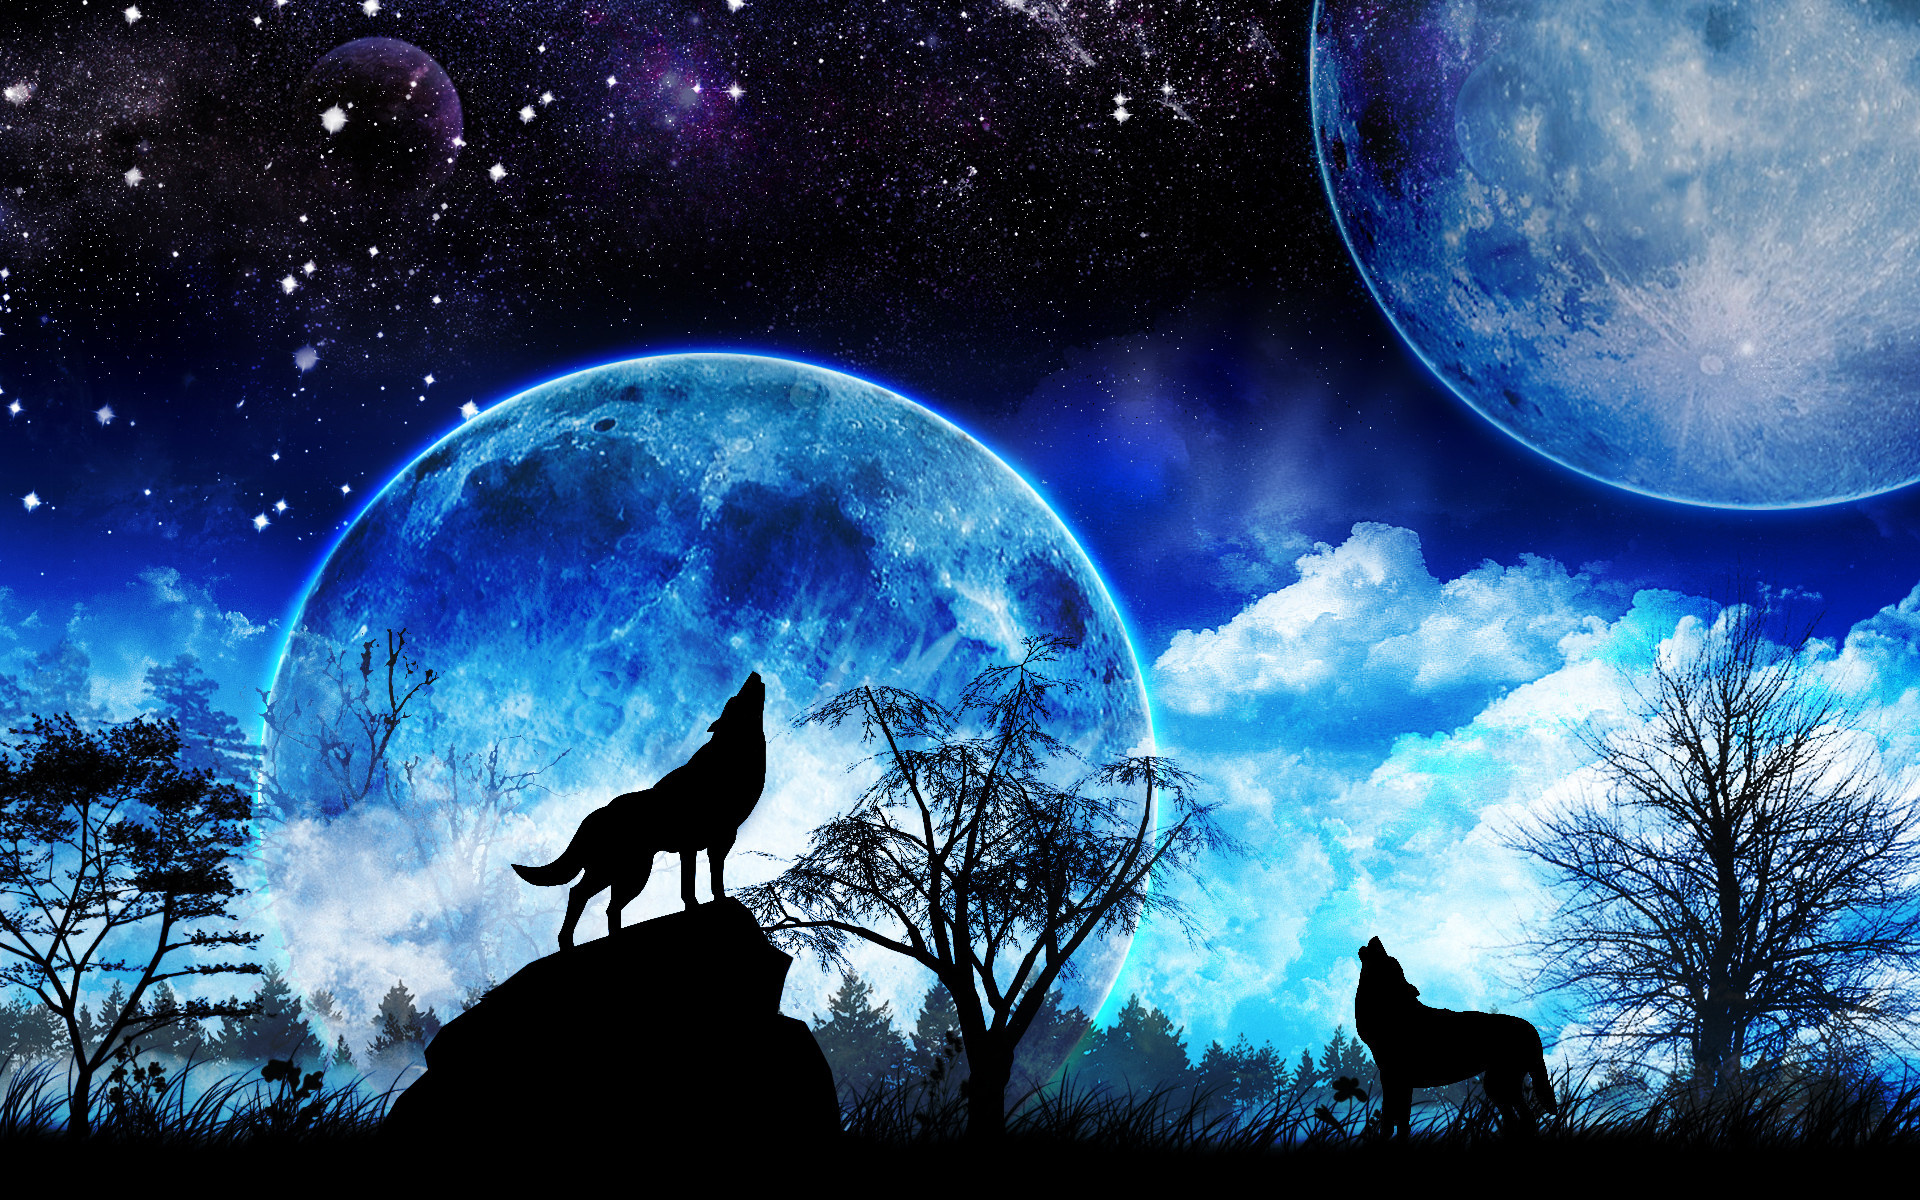 Howling wolf, Wolves in nature, Mysterious moonlight, Majestic creatures, 1920x1200 HD Desktop